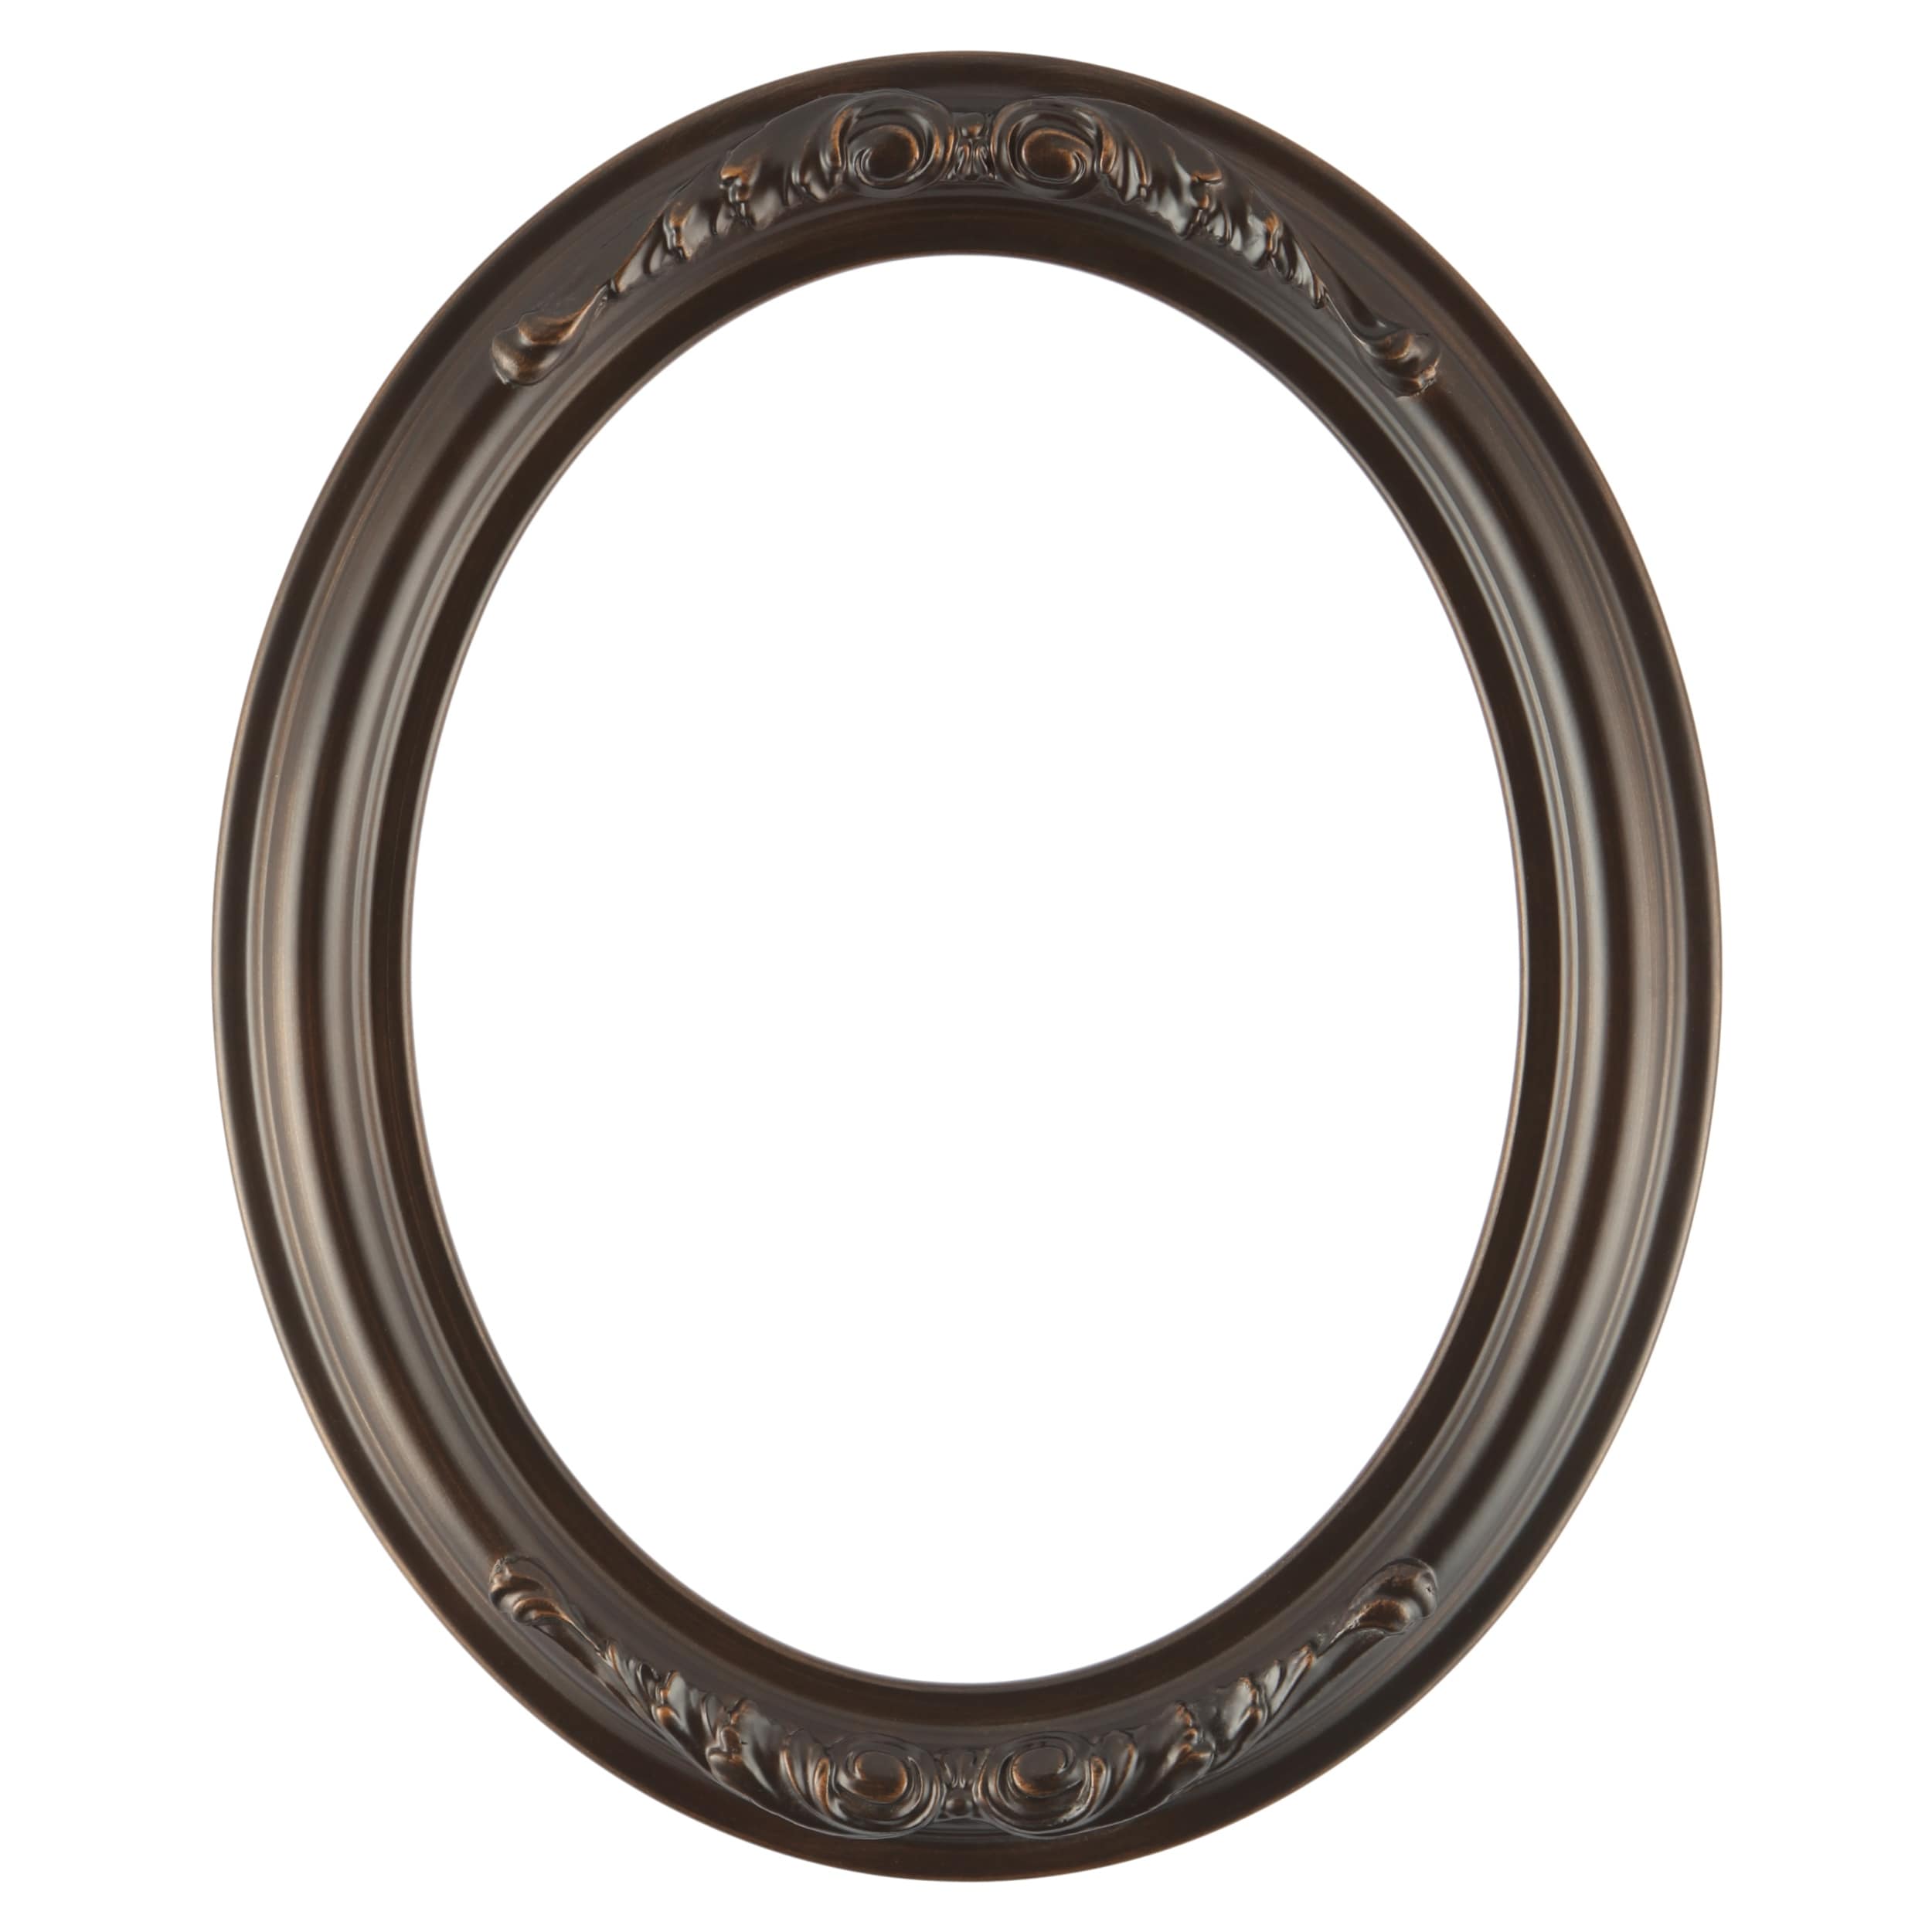 Florence Framed Oval Mirror in Rubbed Bronze Antique Bronze Bed Bath   Beyond 19471253